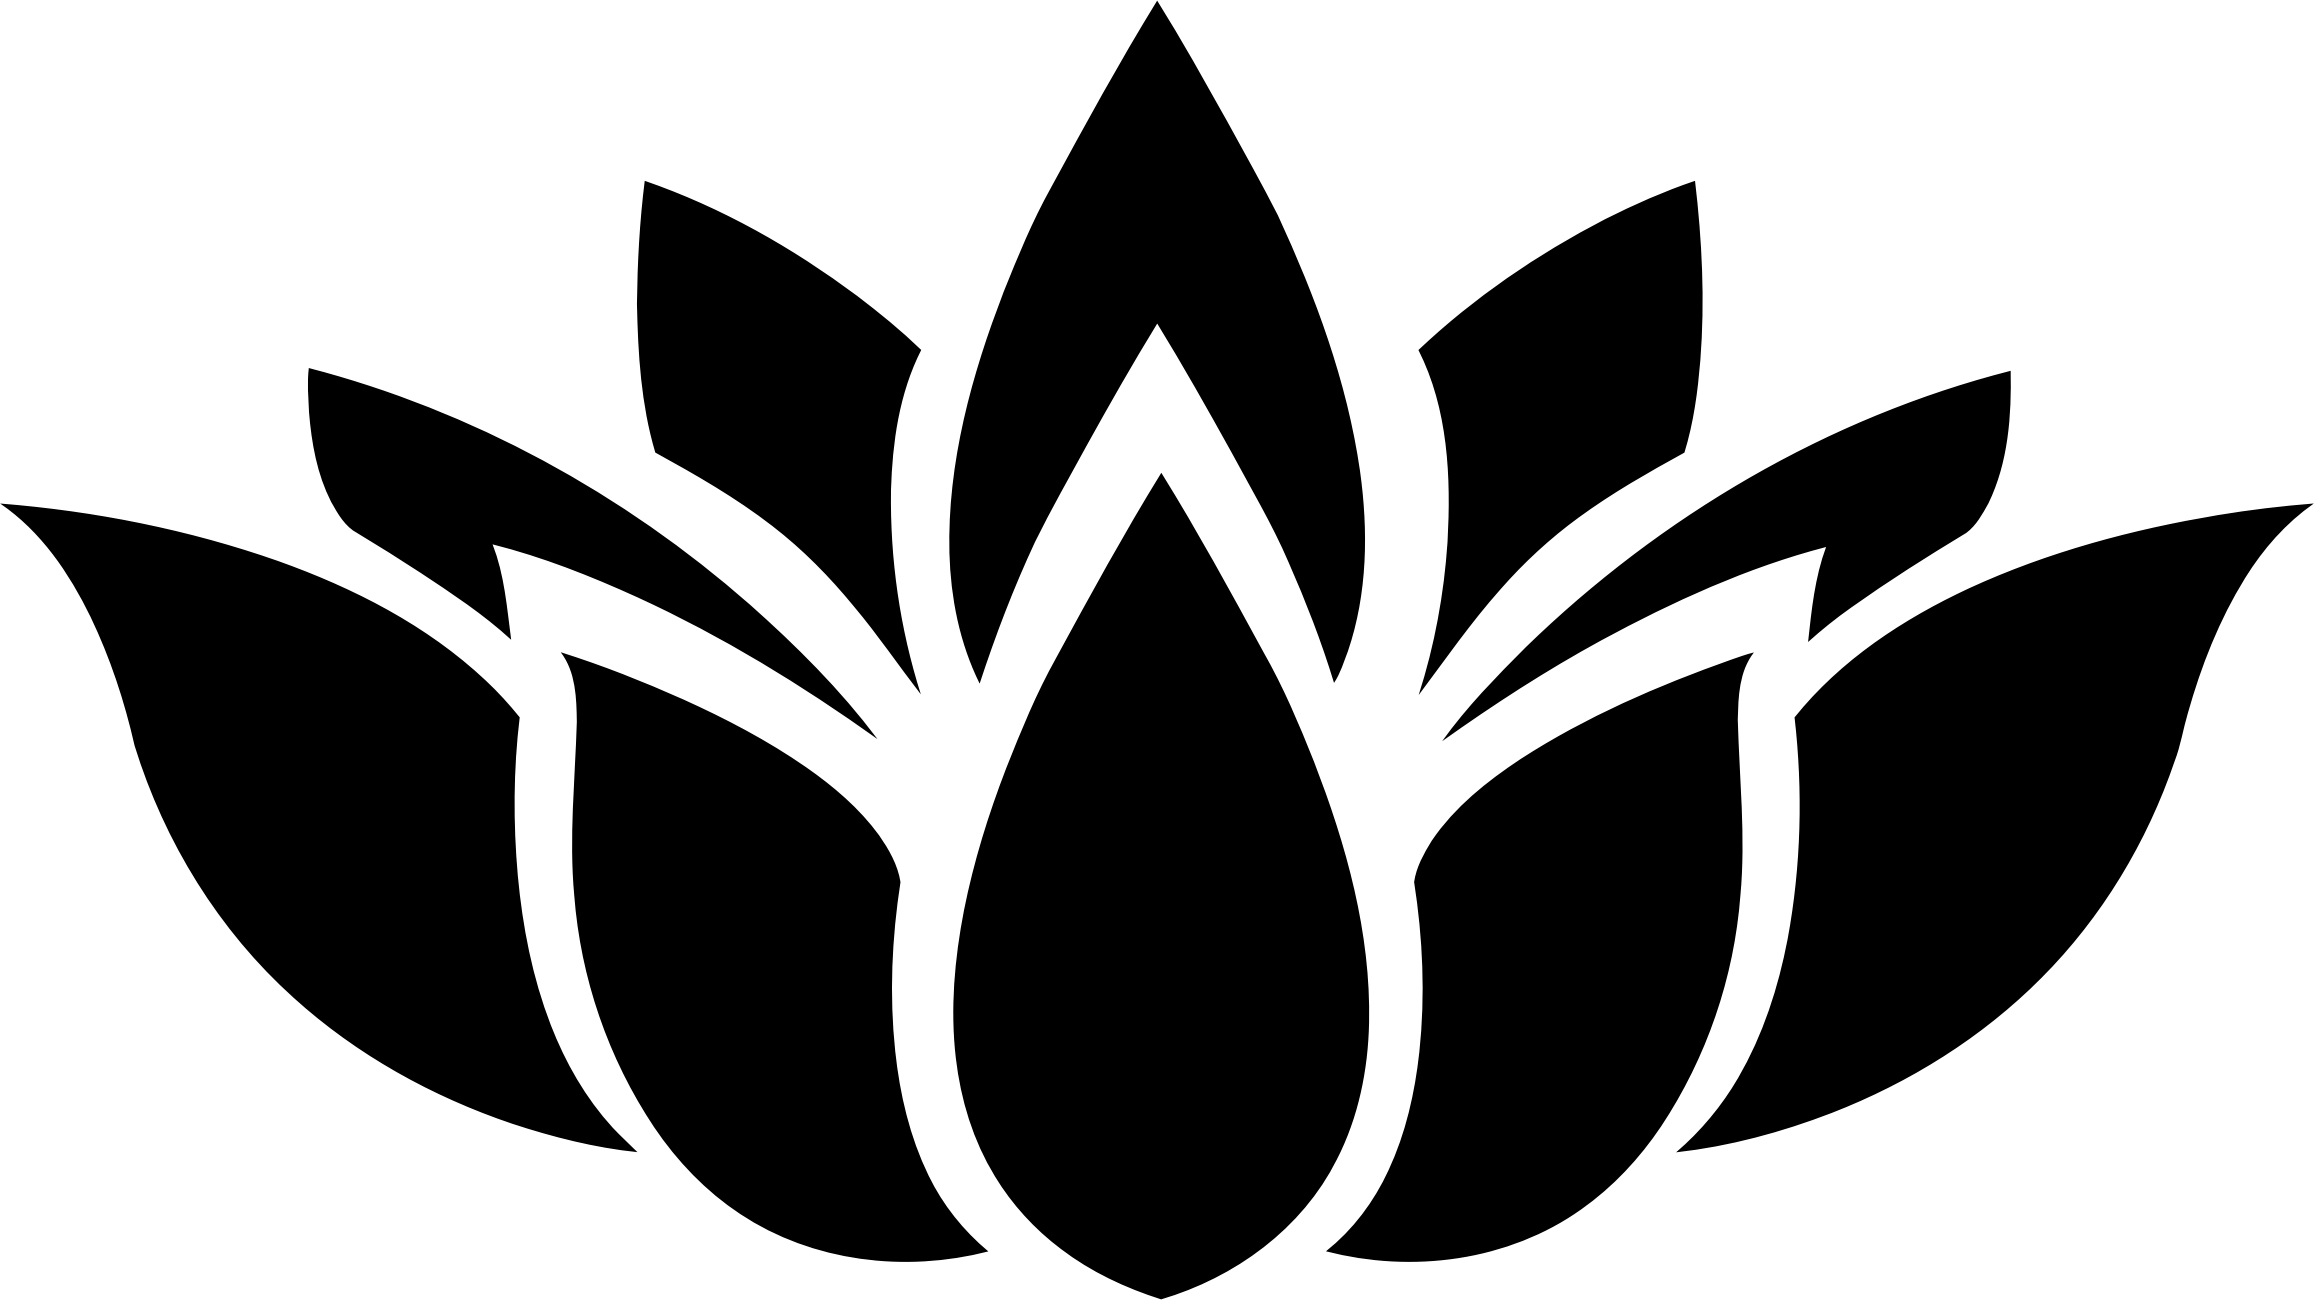 Black Lotus Flower Logo - White lotus flower clipart royalty free stock - RR collections